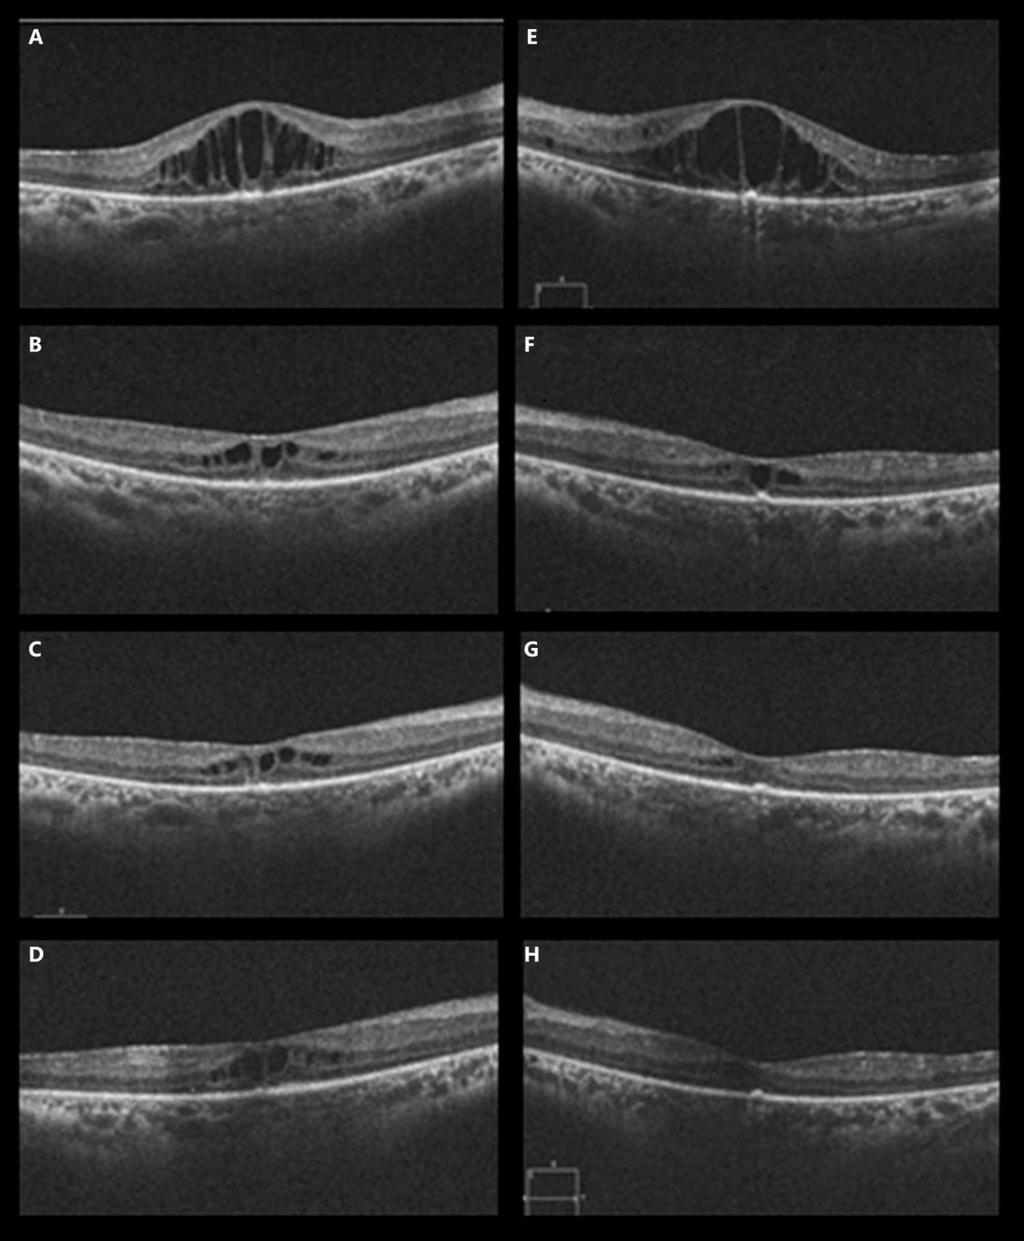 396 Fig. 3. OCT of both eyes before and after intravitreal injections of aflibercept given in Dubai.